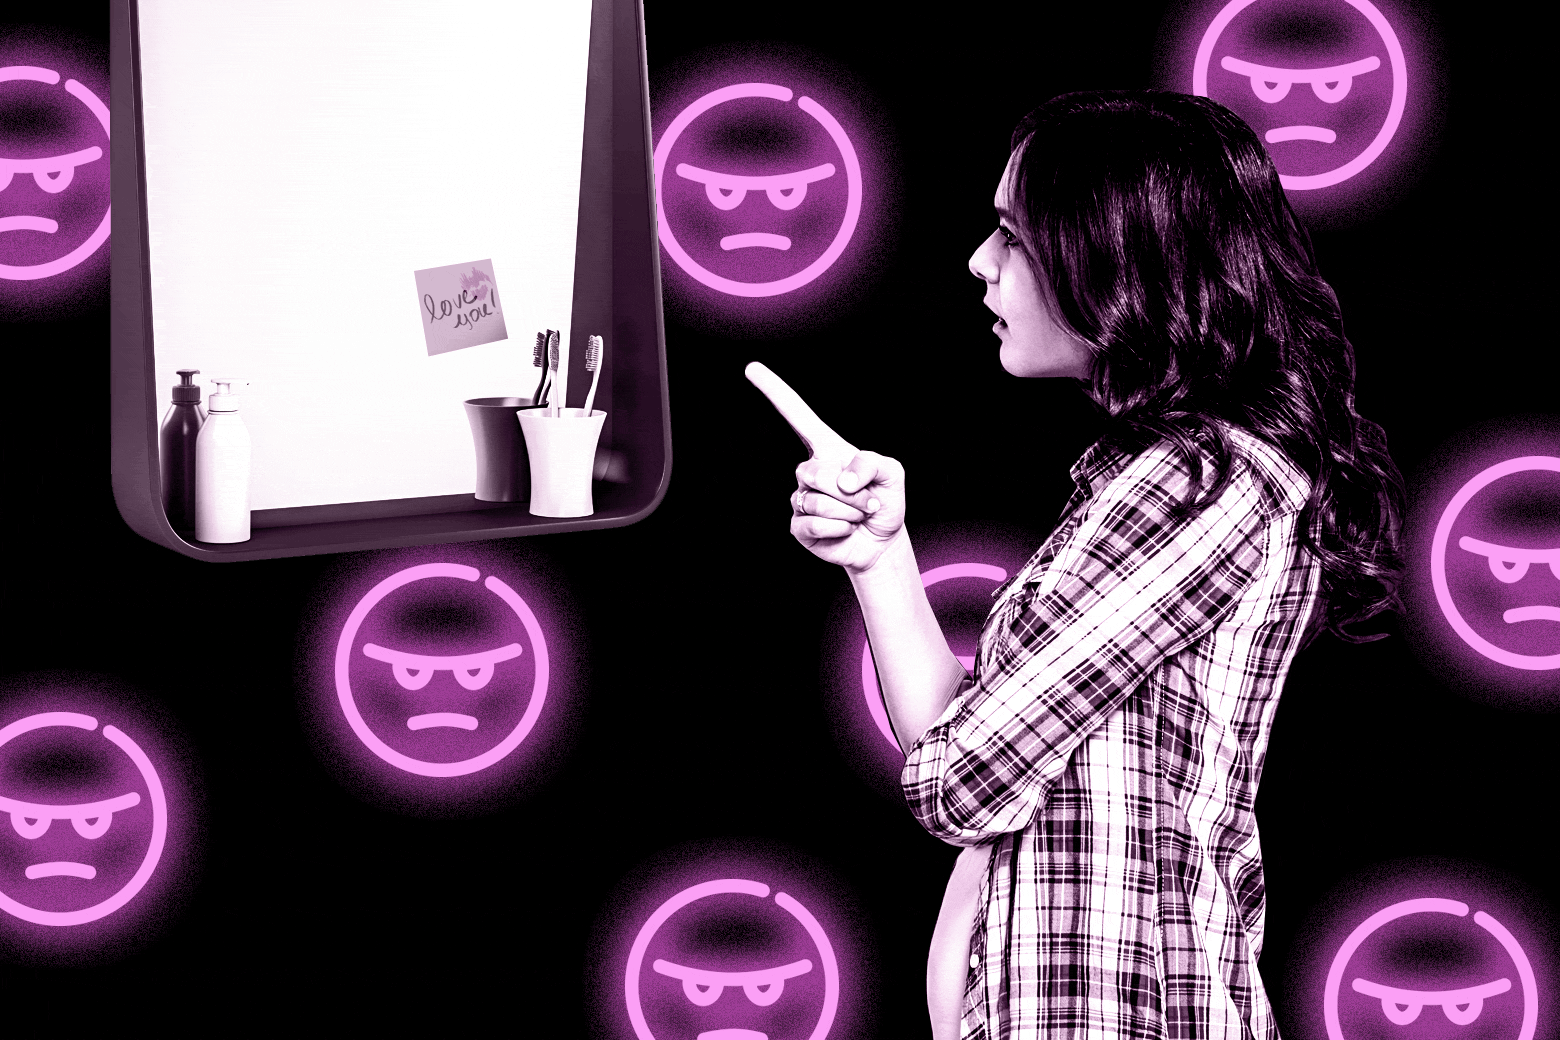 Photo illustration of a woman looking at a bathroom mirror with a Post-It Note from another woman on it. Angry face emojis glow neon in the background.